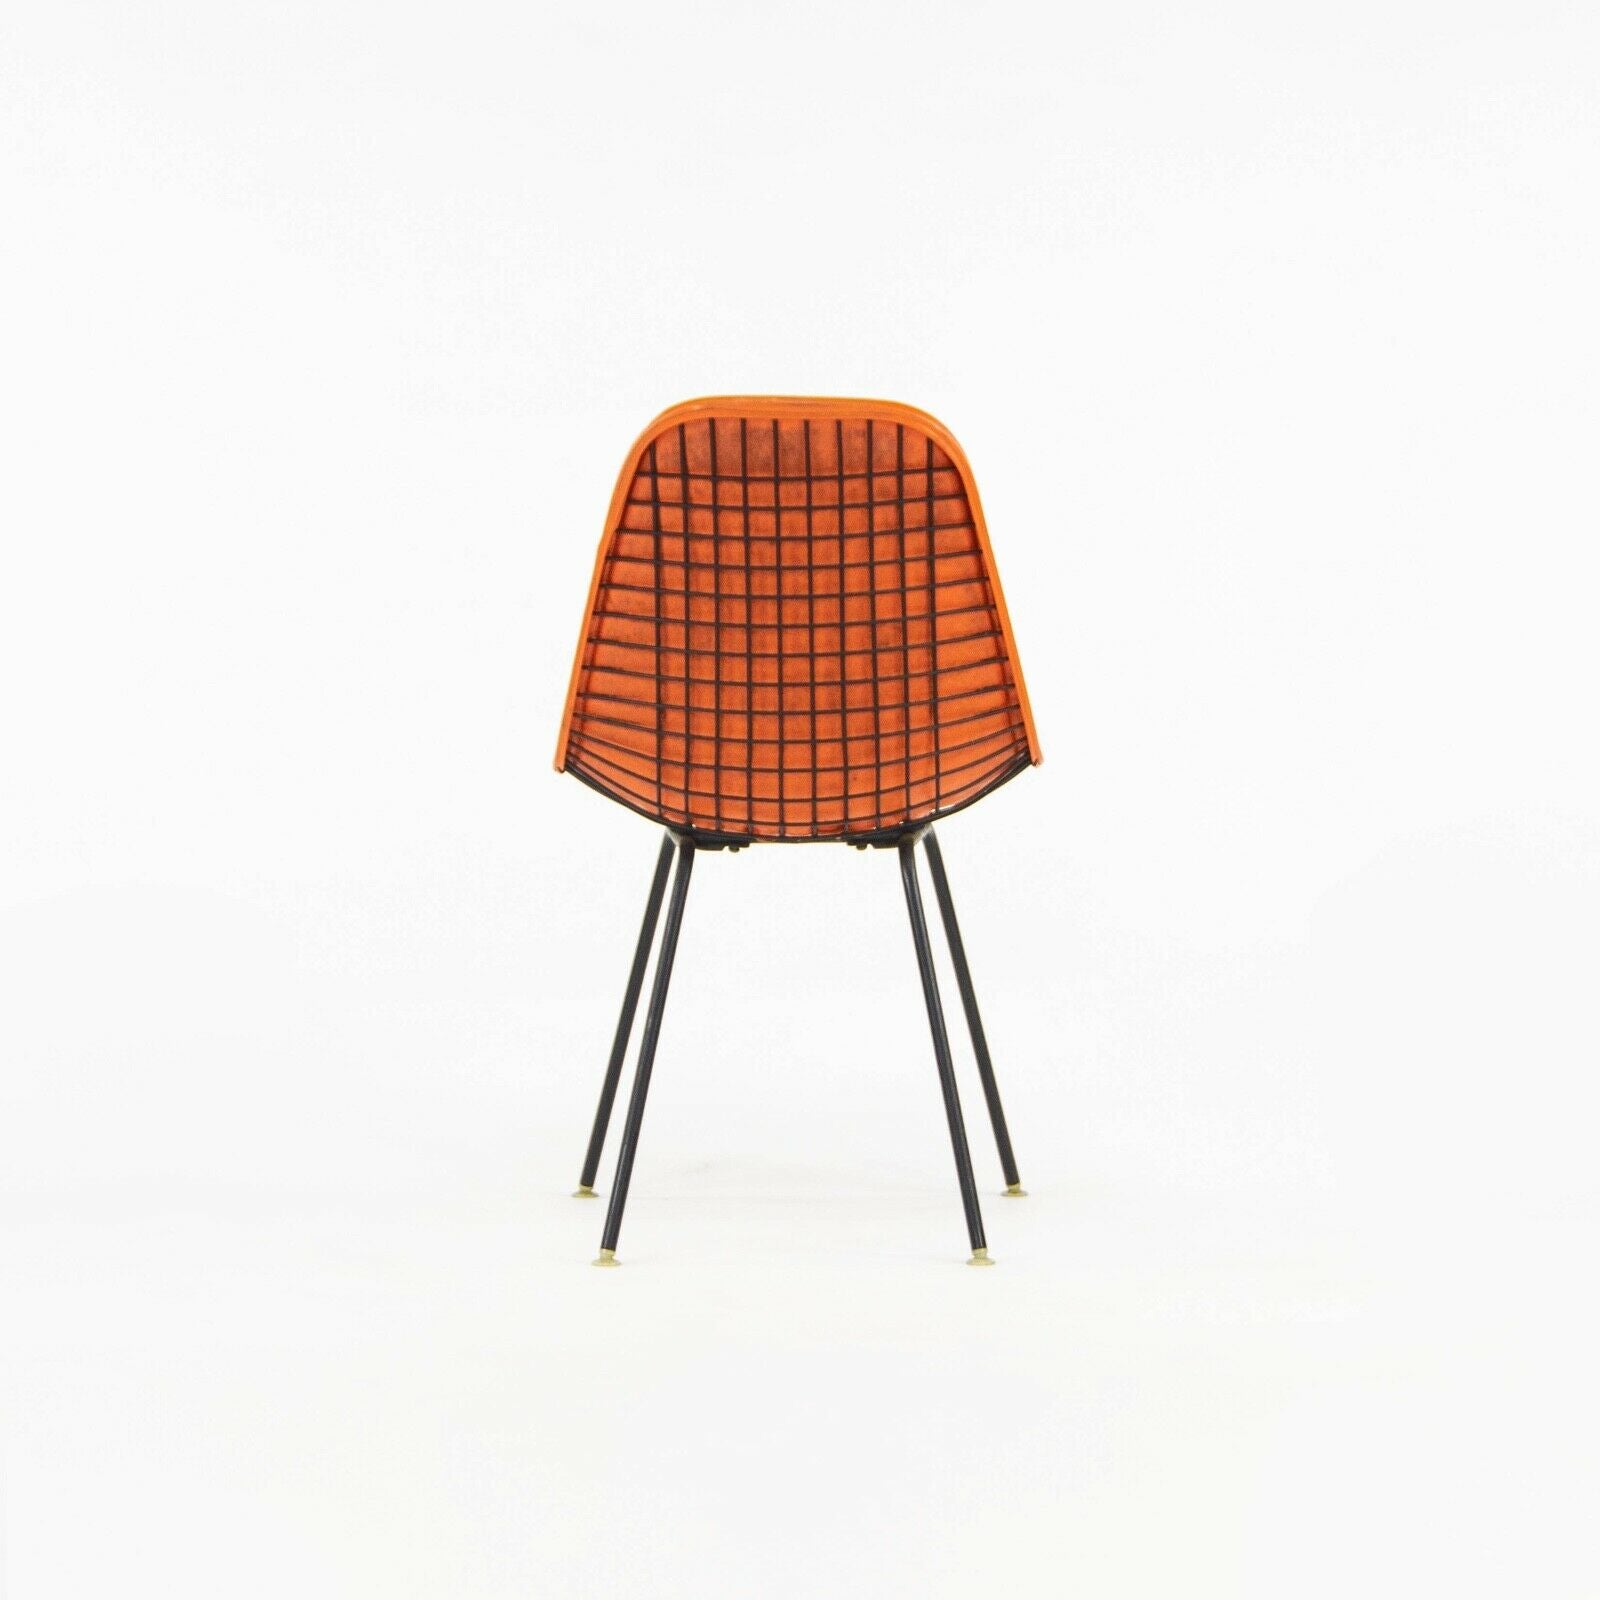 1957 Herman Miller Eames DKX Wire Dining Chair with Full Naugahyde Orange Pad